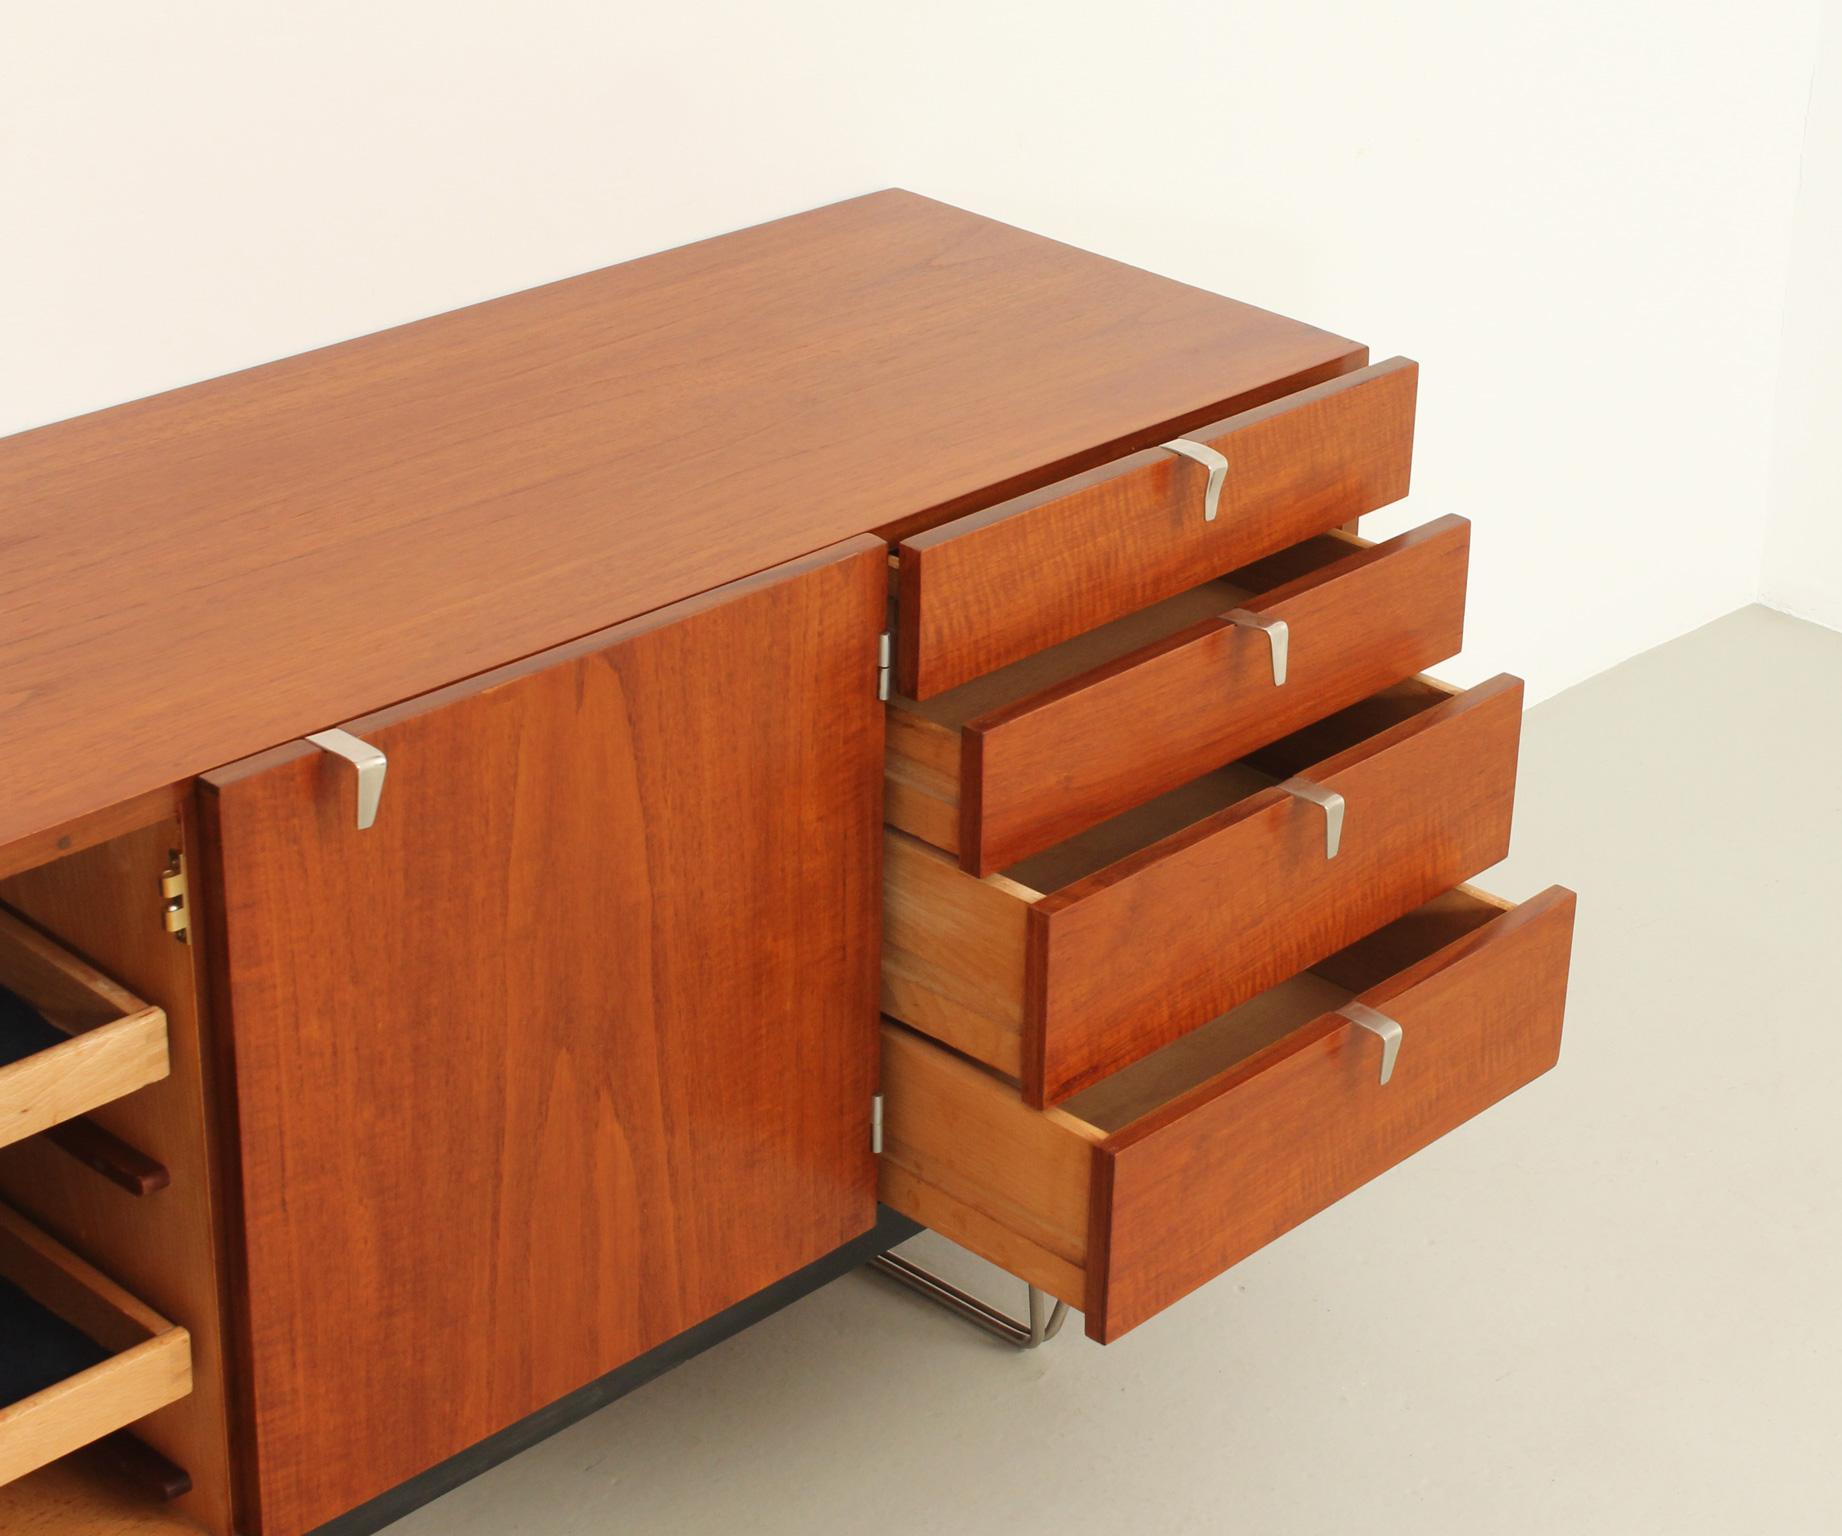 Steel S Range Sideboard by John and Sylvia Reid for Stag Furniture, UK, 1959 For Sale